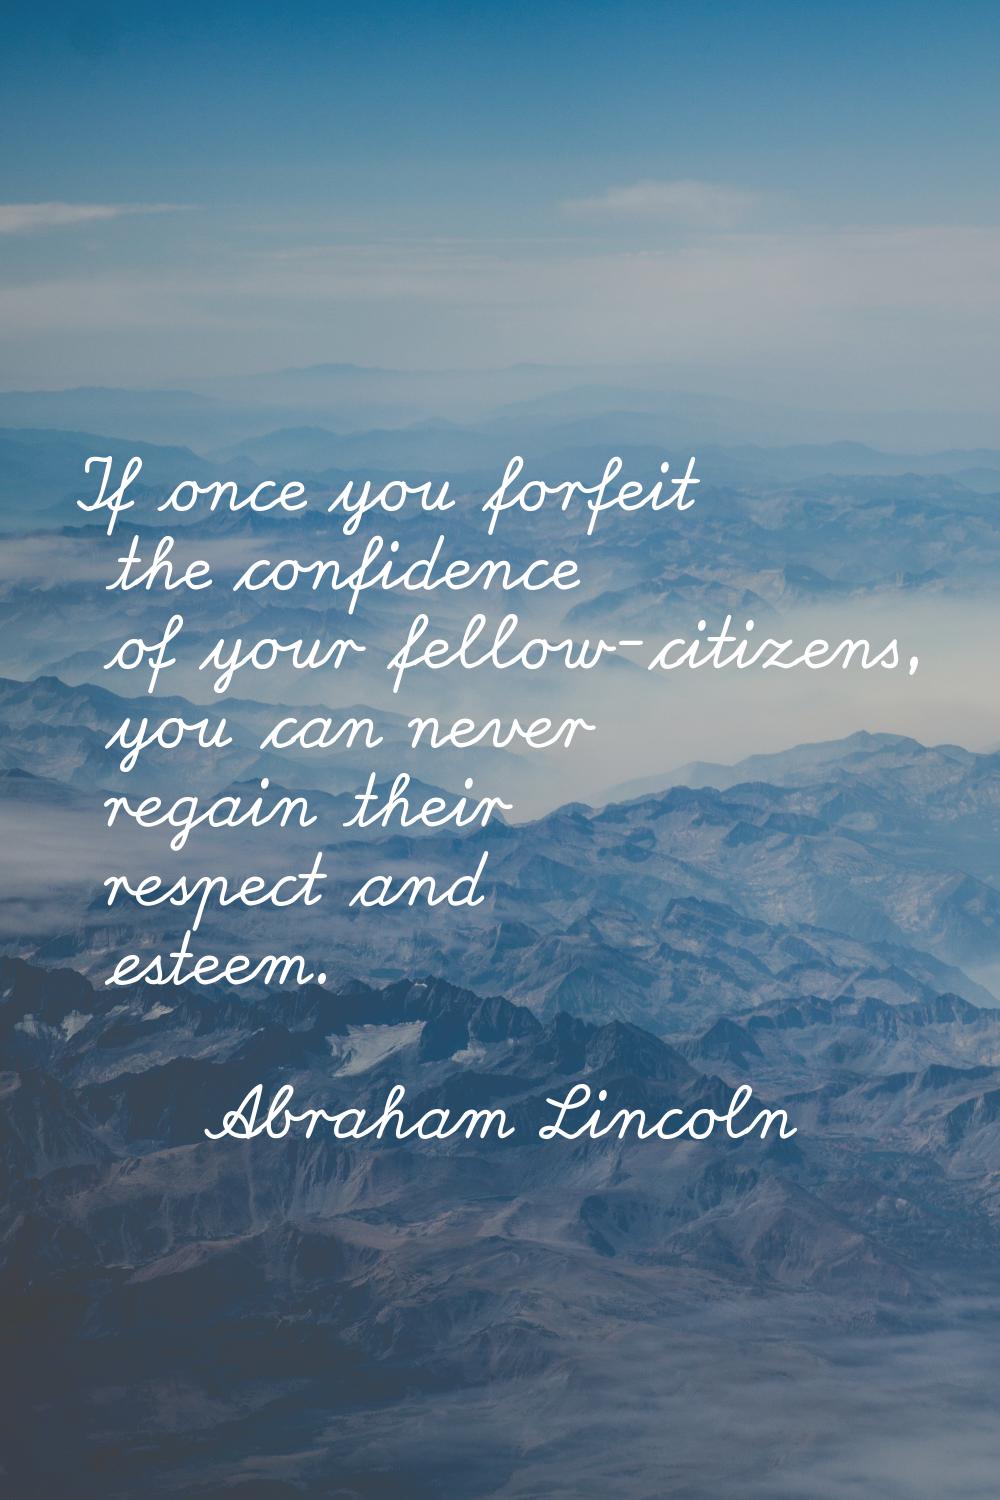 If once you forfeit the confidence of your fellow-citizens, you can never regain their respect and 